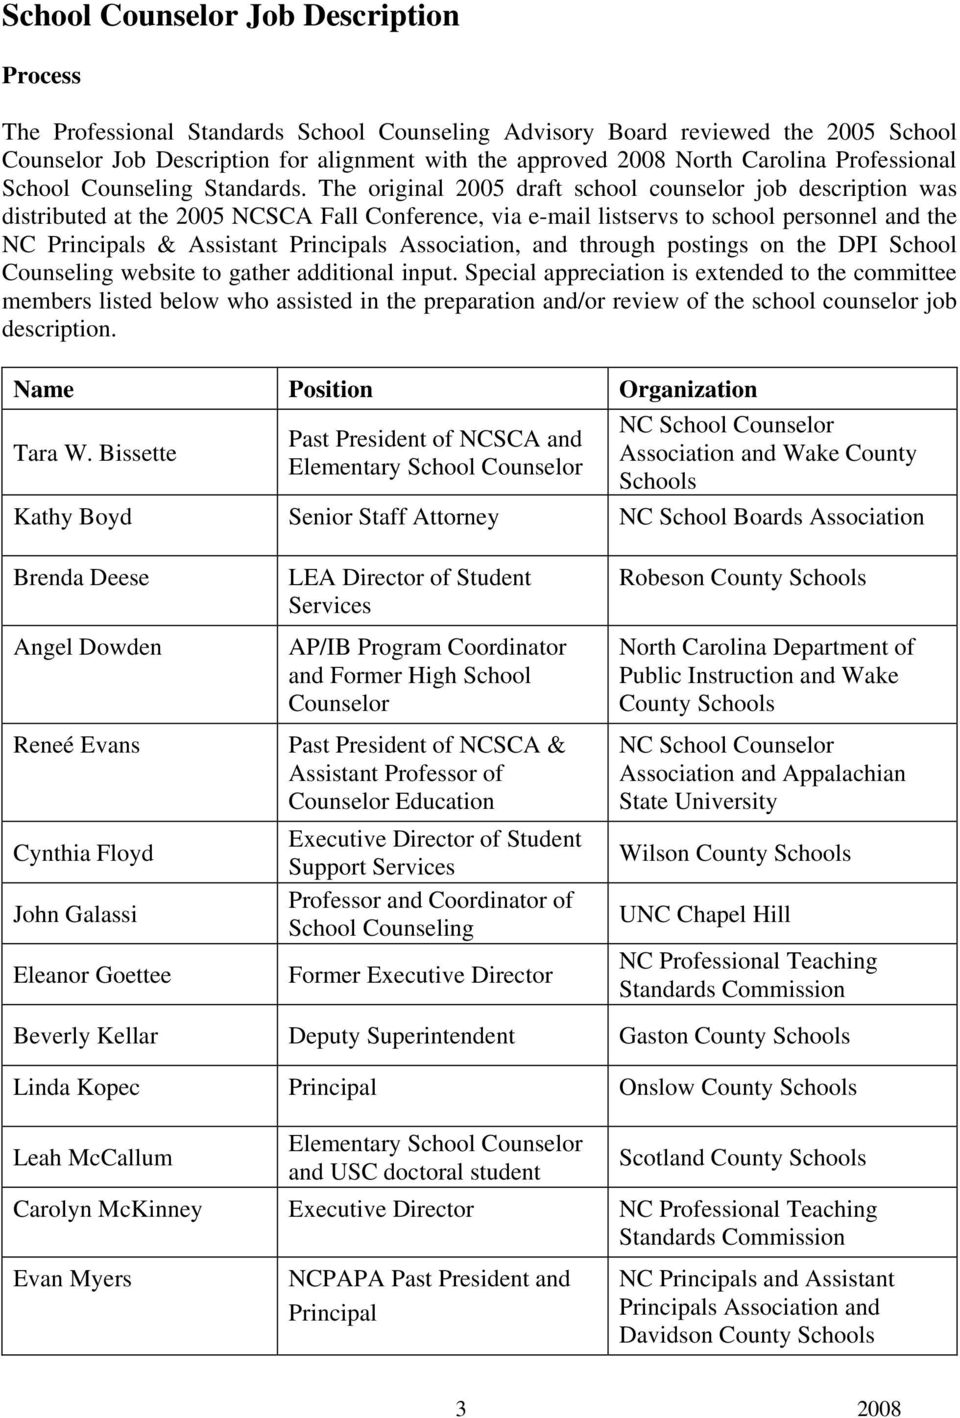 The original 2005 draft school counselor job description was distributed at the 2005 NCSCA Fall Conference, via e-mail listservs to school personnel and the NC Principals & Assistant Principals